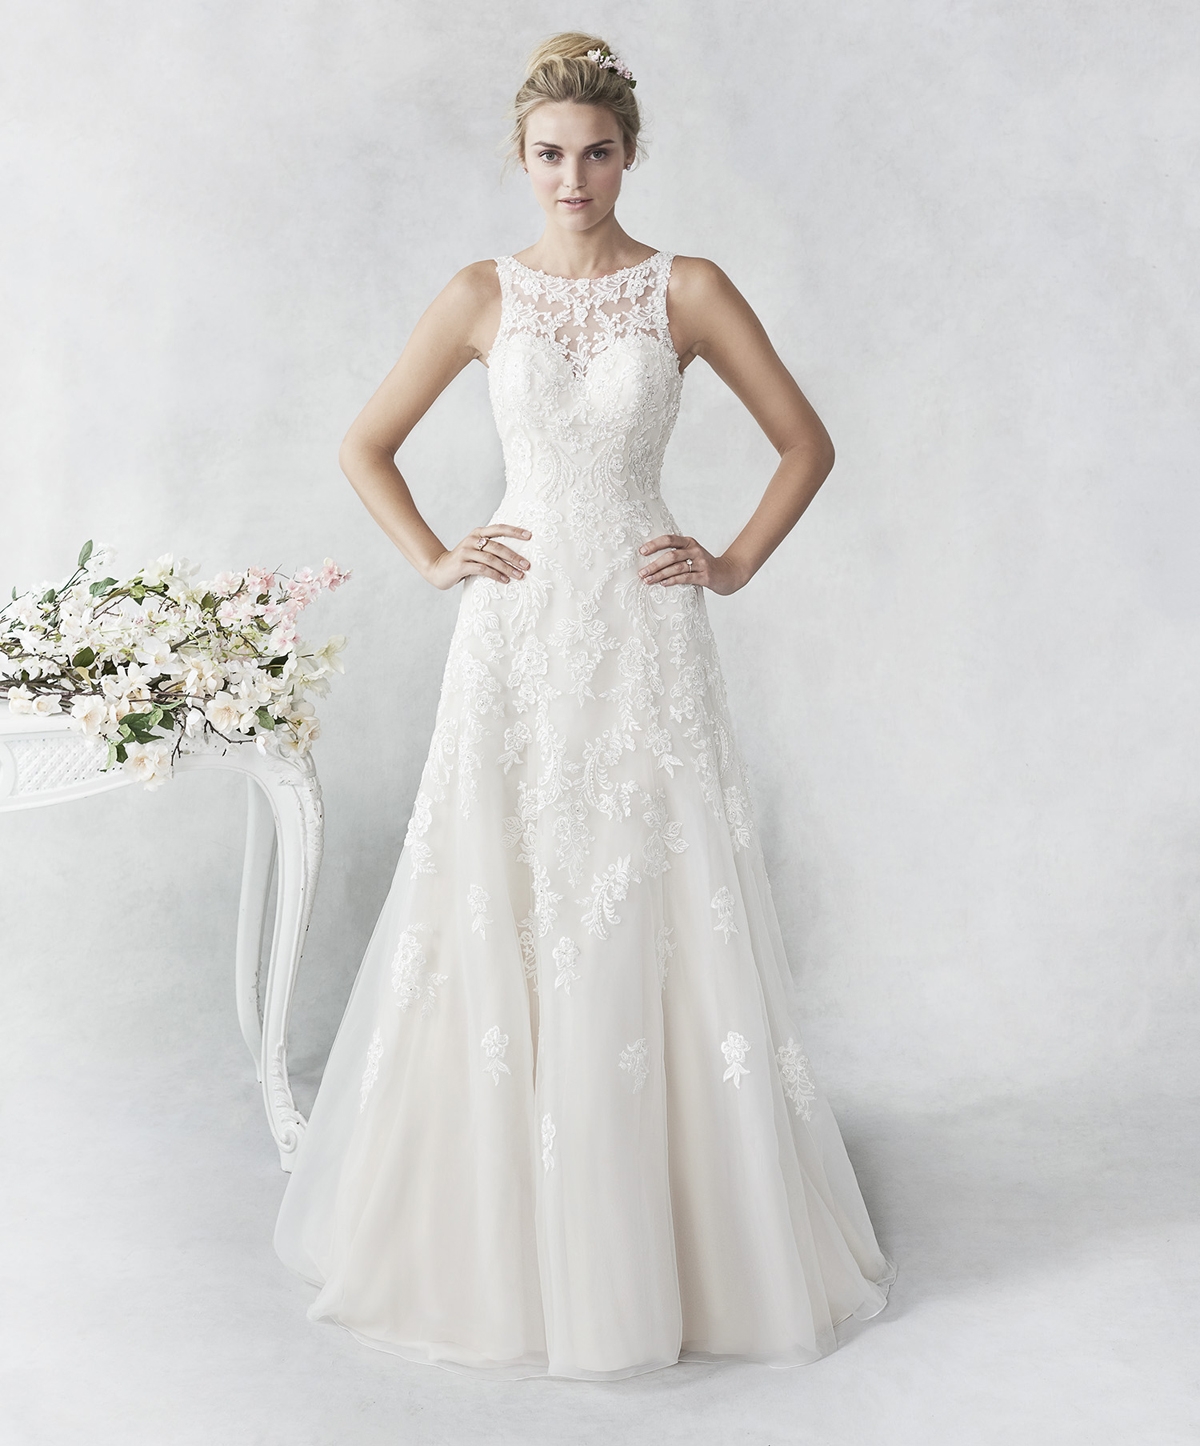 Best Wedding Dresses Windsor Ontario in the world Check it out now 